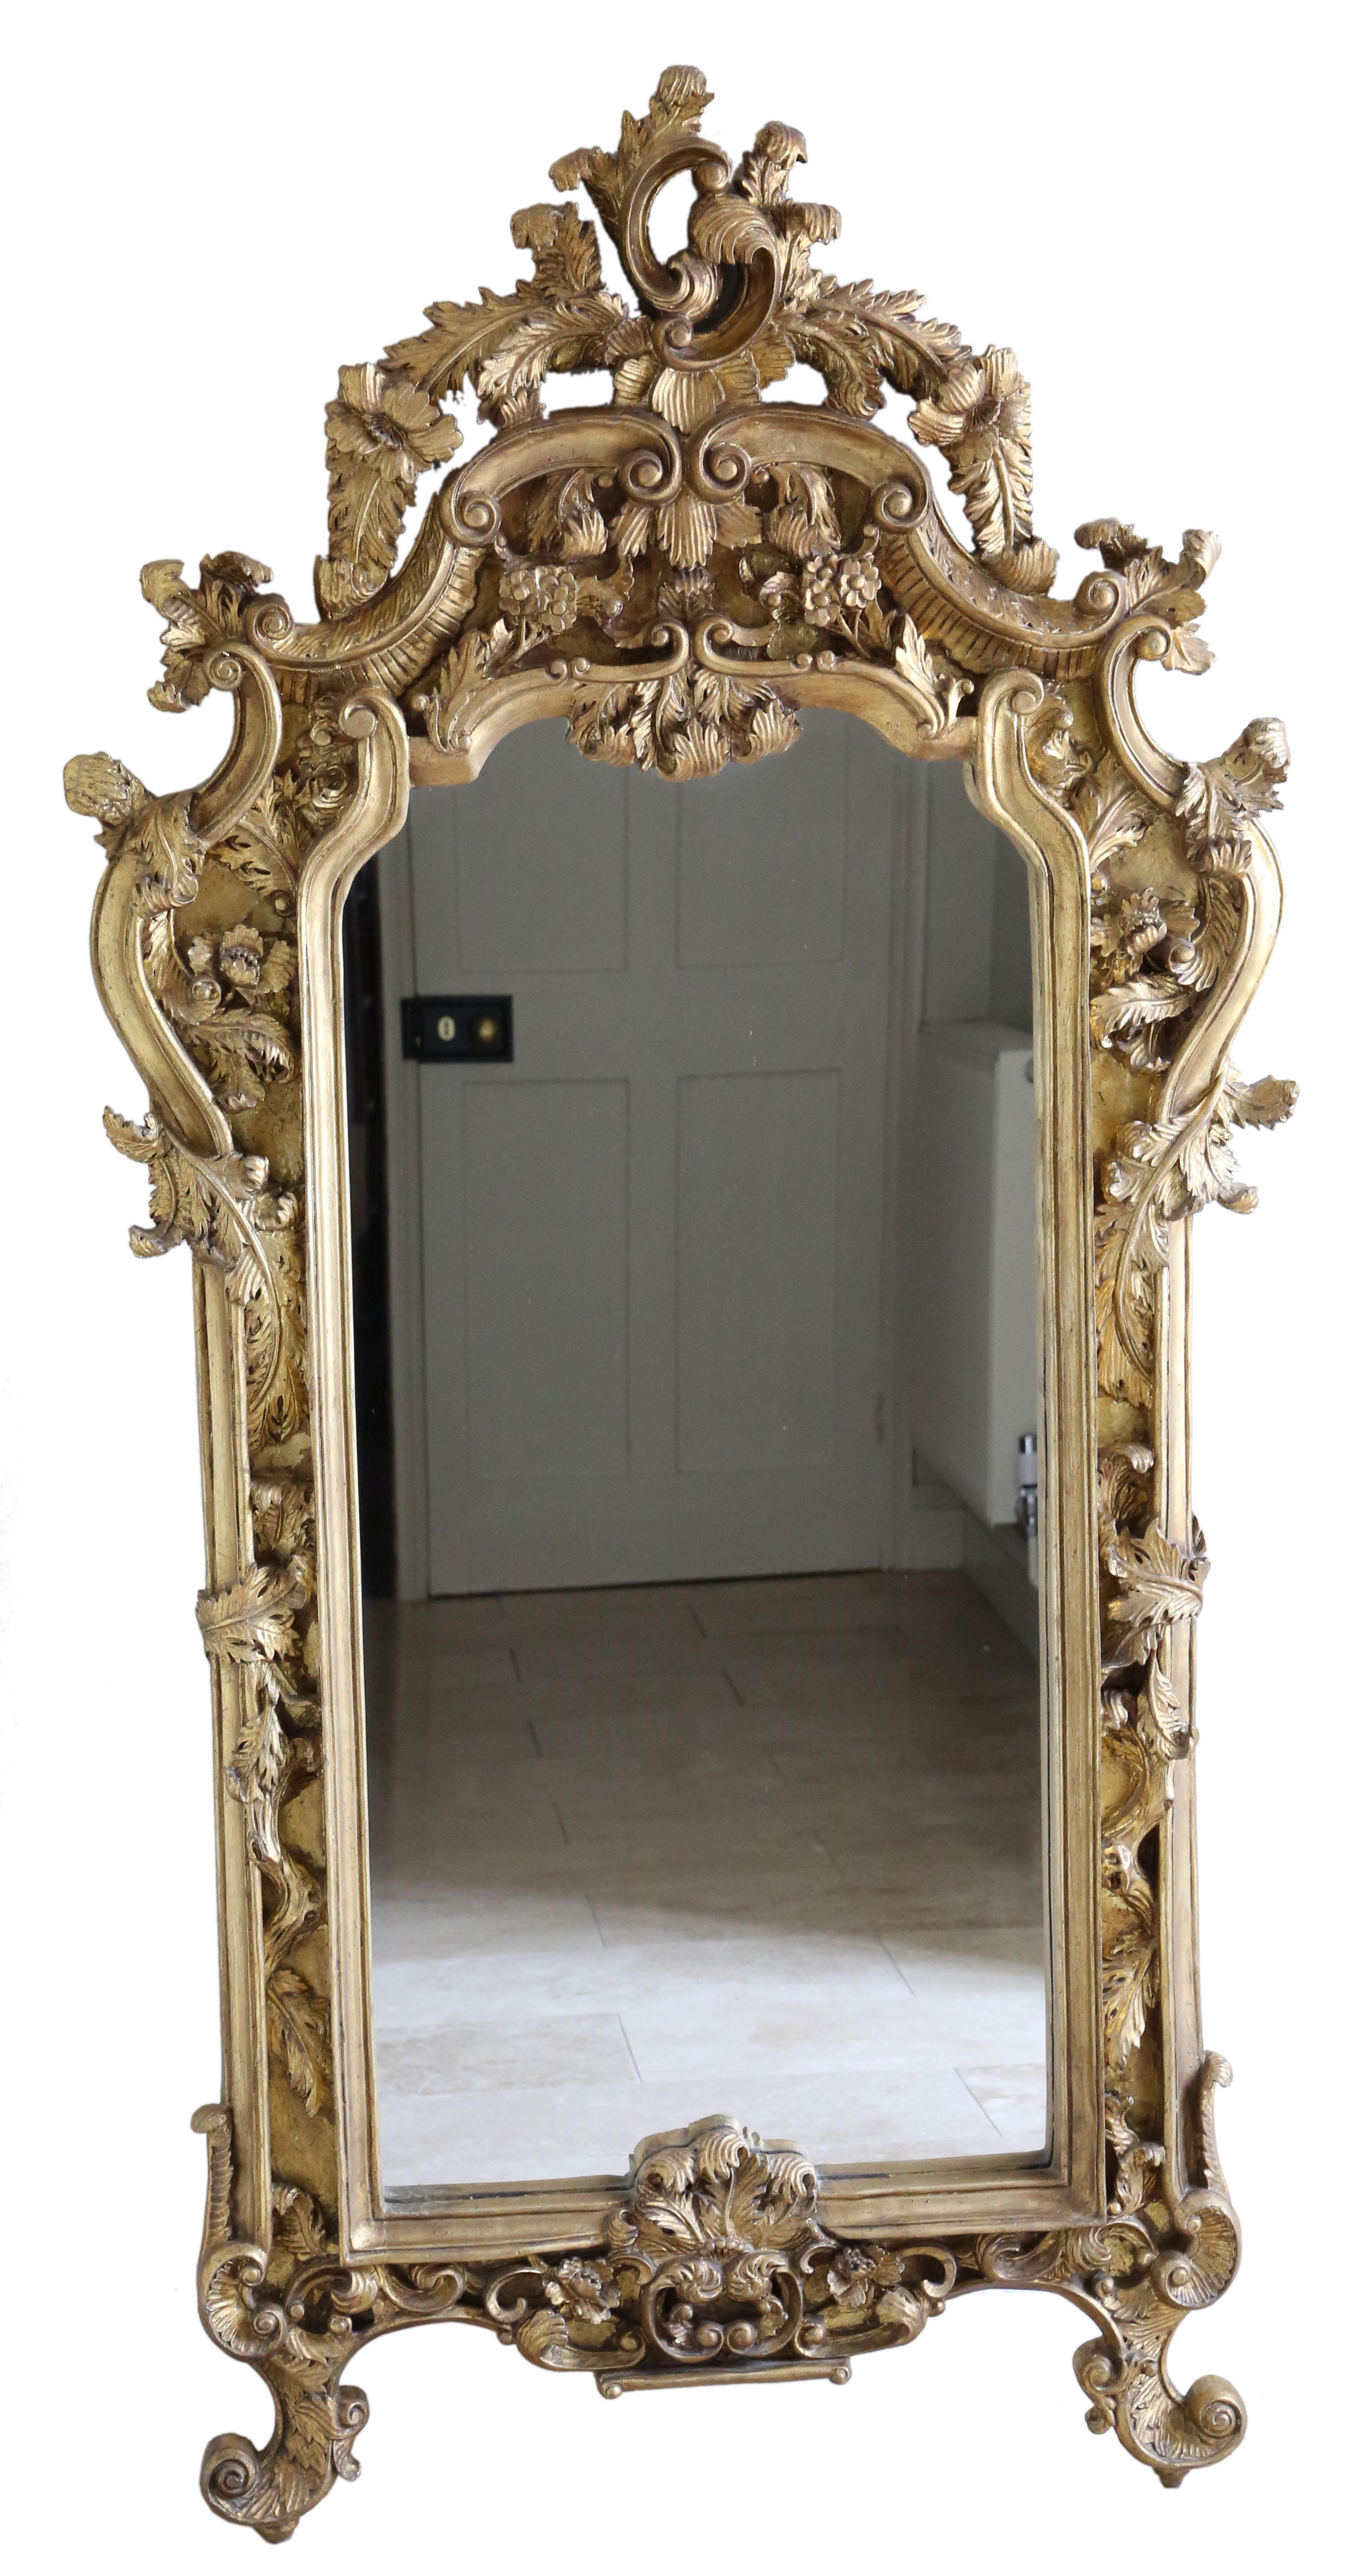 Antique Vintage very large fine quality gilt floor mirror. Approximately 50 years old.

An impressive rare find, that would look amazing in the right location. No loose joints or woodworm.

The original mirrored glass is in good